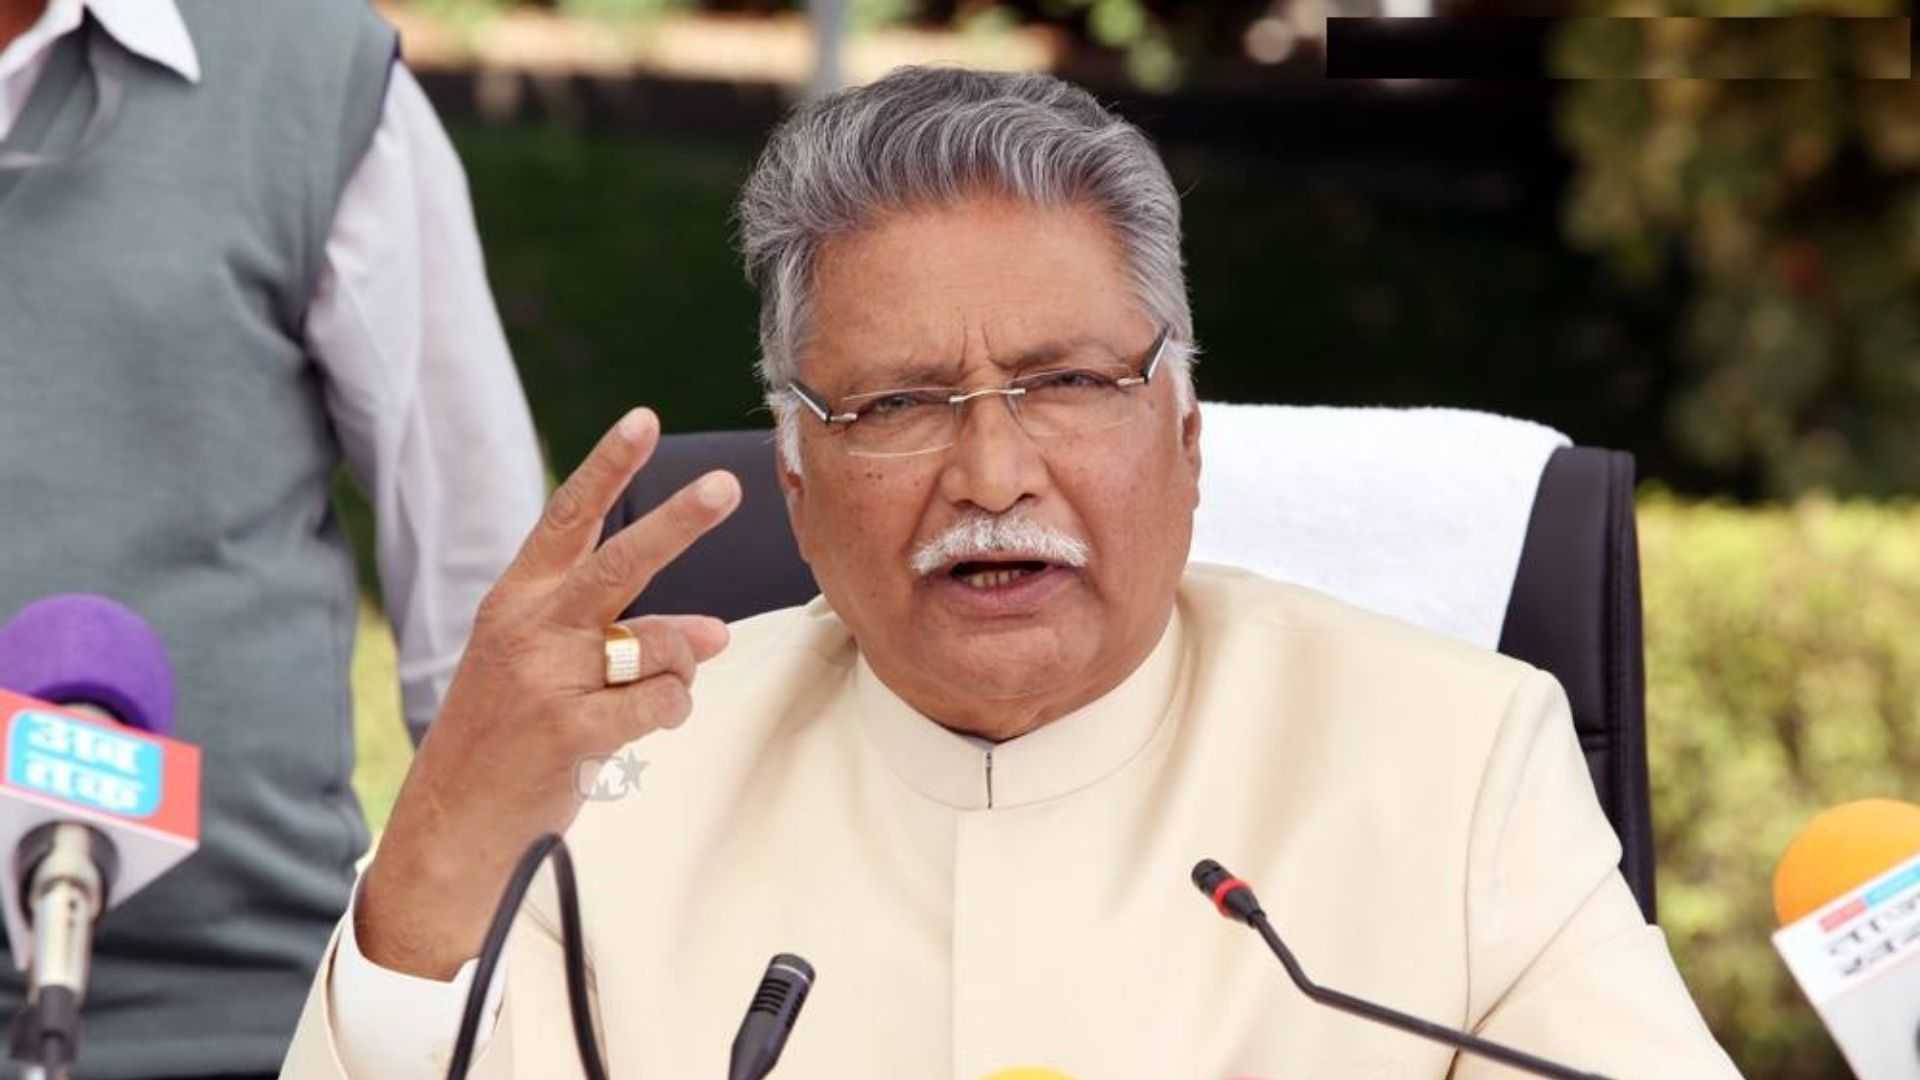 Vikram Gokhale's family rubbishes rumors of his death, reveals actor is currently on ventilator